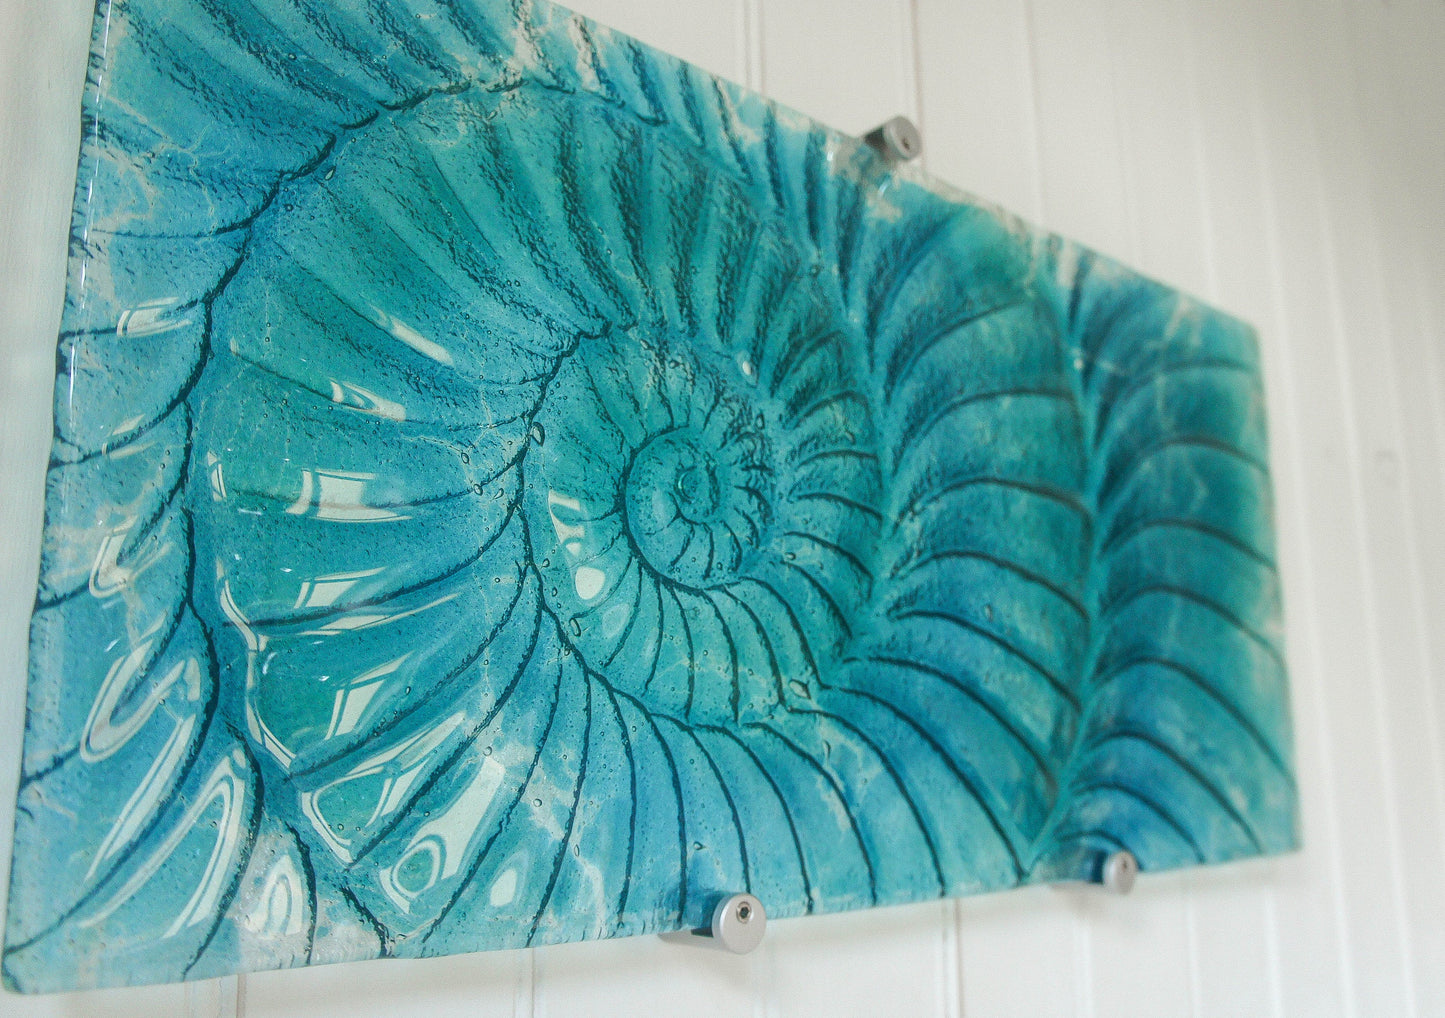 Ammonite Wall Panel - Large Landscape - Swirl Turquoise Blue - 56x26cm(22x10") with fixings